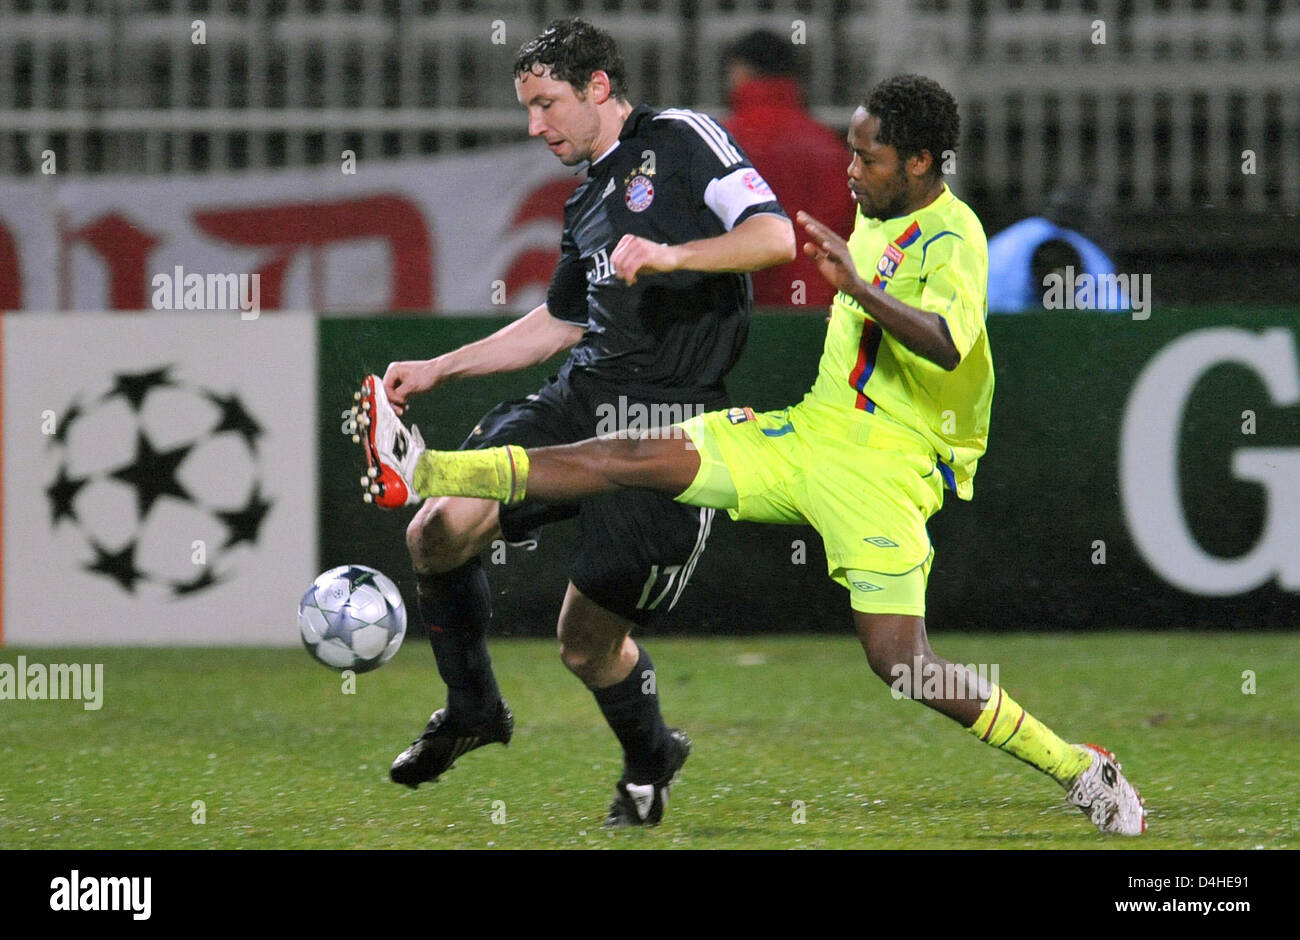 Jean Makoun (R) of Olympique Lyon vies for the ball with Mark van Bommel of FC Bayern Munich during the Champions League Group F match at Stade de Gerland in Lyon, France, 10 December 2008. Bayern Munich defeated Lyon 3-2 securing the first place in UEFA Champions League Group F. Photo: Andreas Gebert Stock Photo